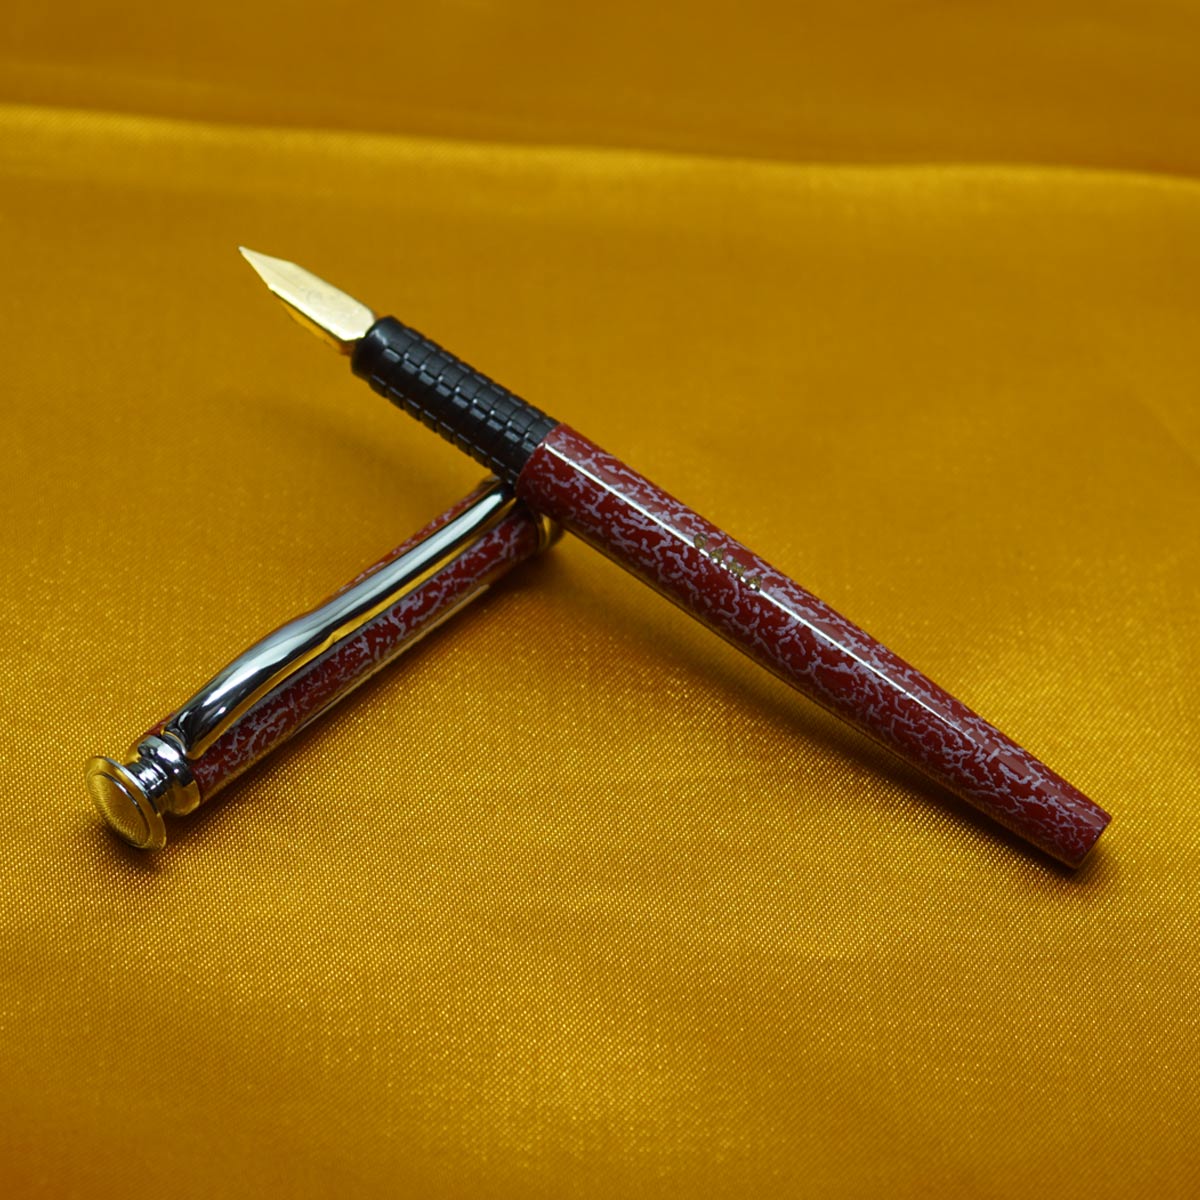 Gama - 20 - Red  Color Marble Finish Body and Cap Aeromatic Fountain Pen with Fine Tipped MB Gold Plated German Nib SKU 22200